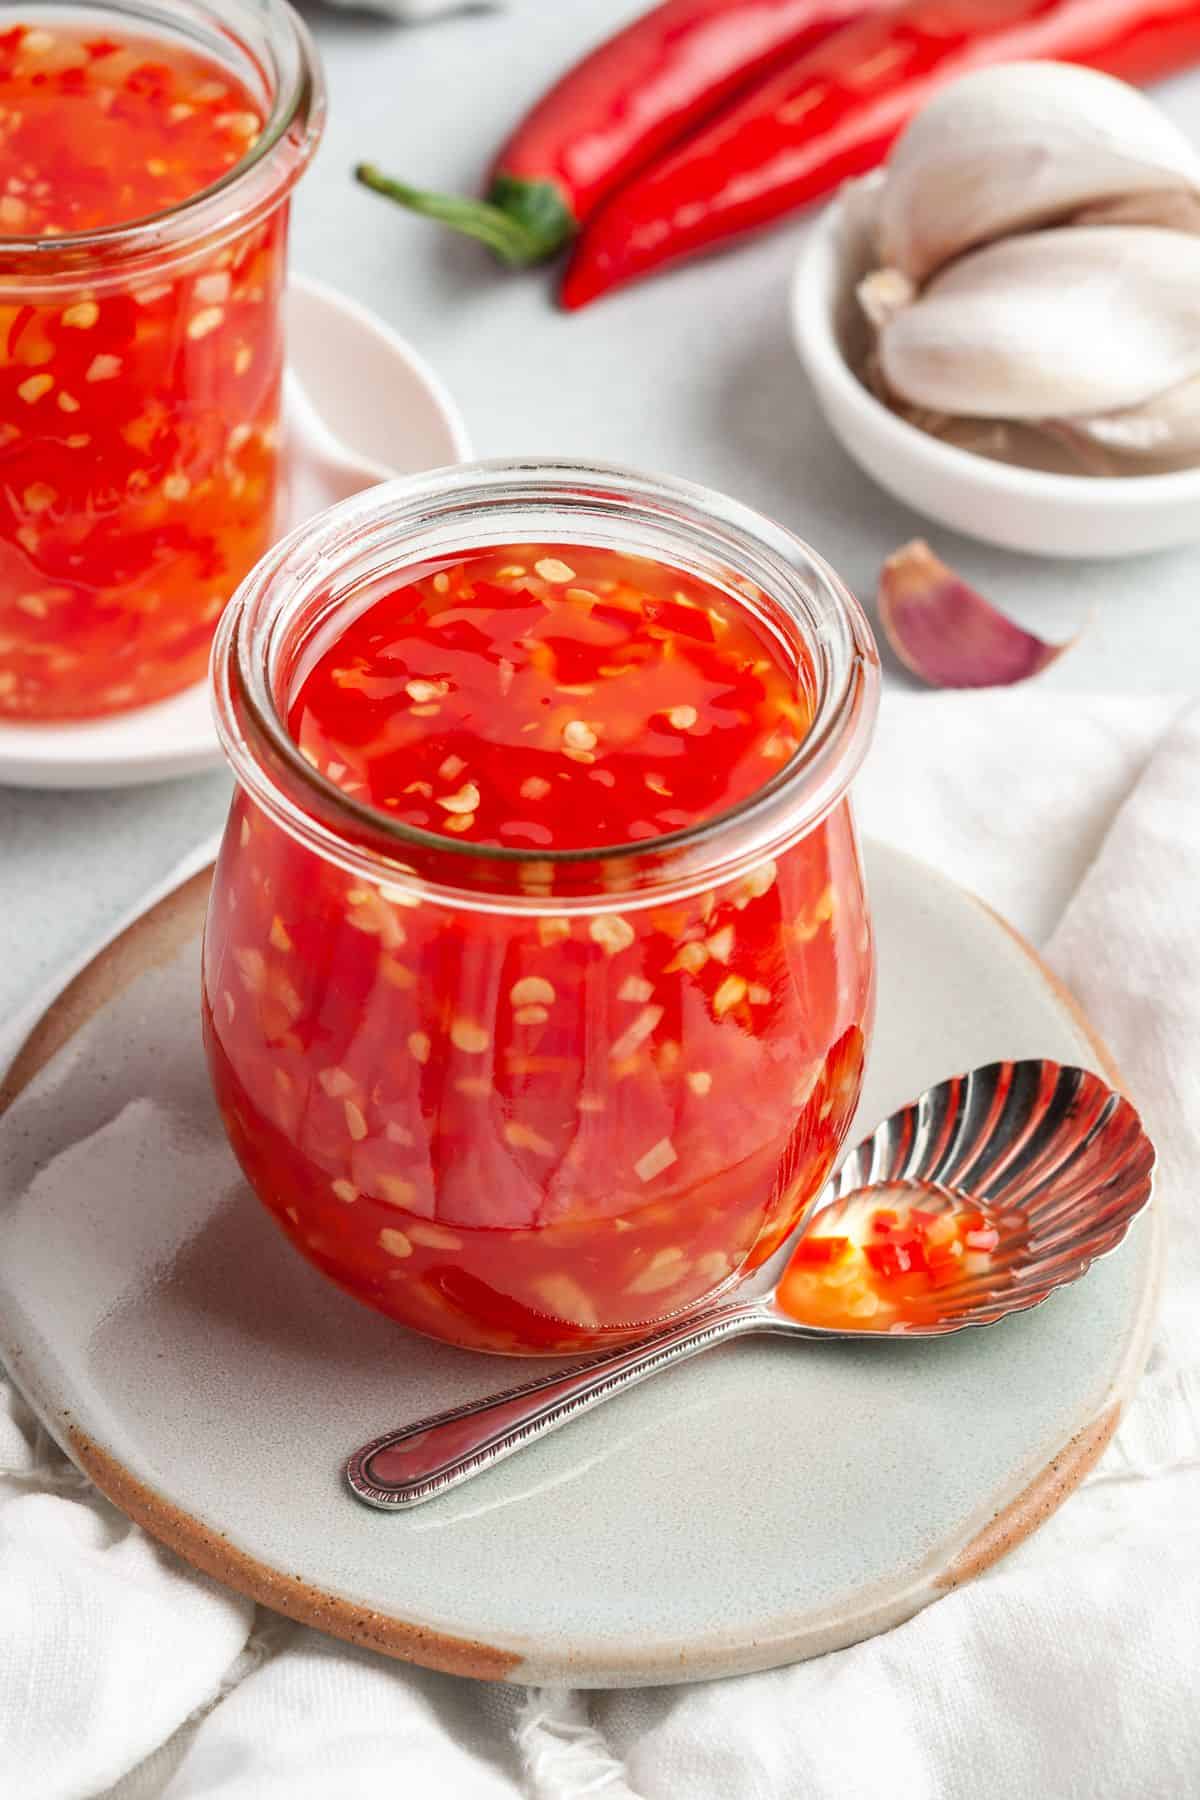 A chunky red sauce in a small glass jar placed on a light blue plate. A spoon with a bit of red sauce is place next to it.